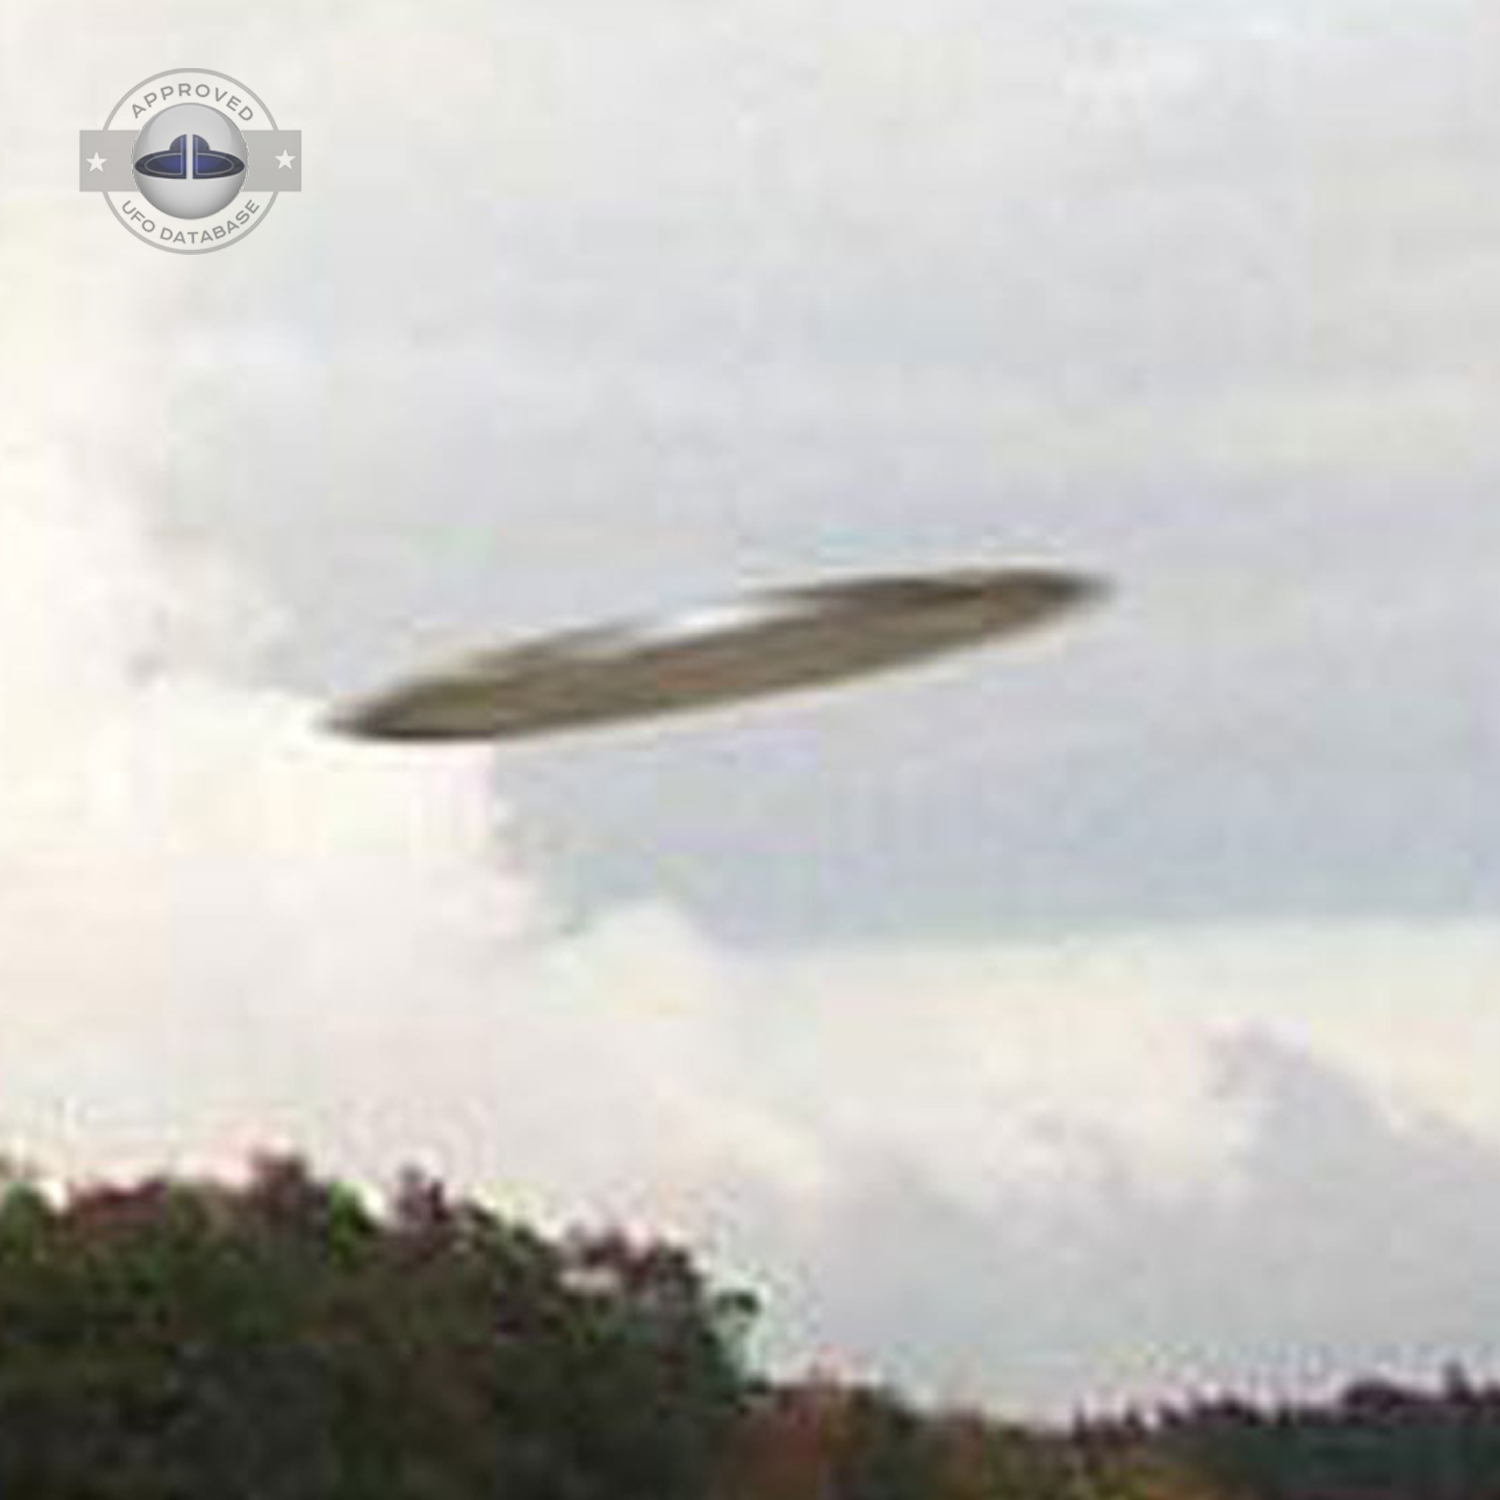 Clean UFO picture UFO disc flying over a lake in Kustavi Finland UFO Picture #56-3